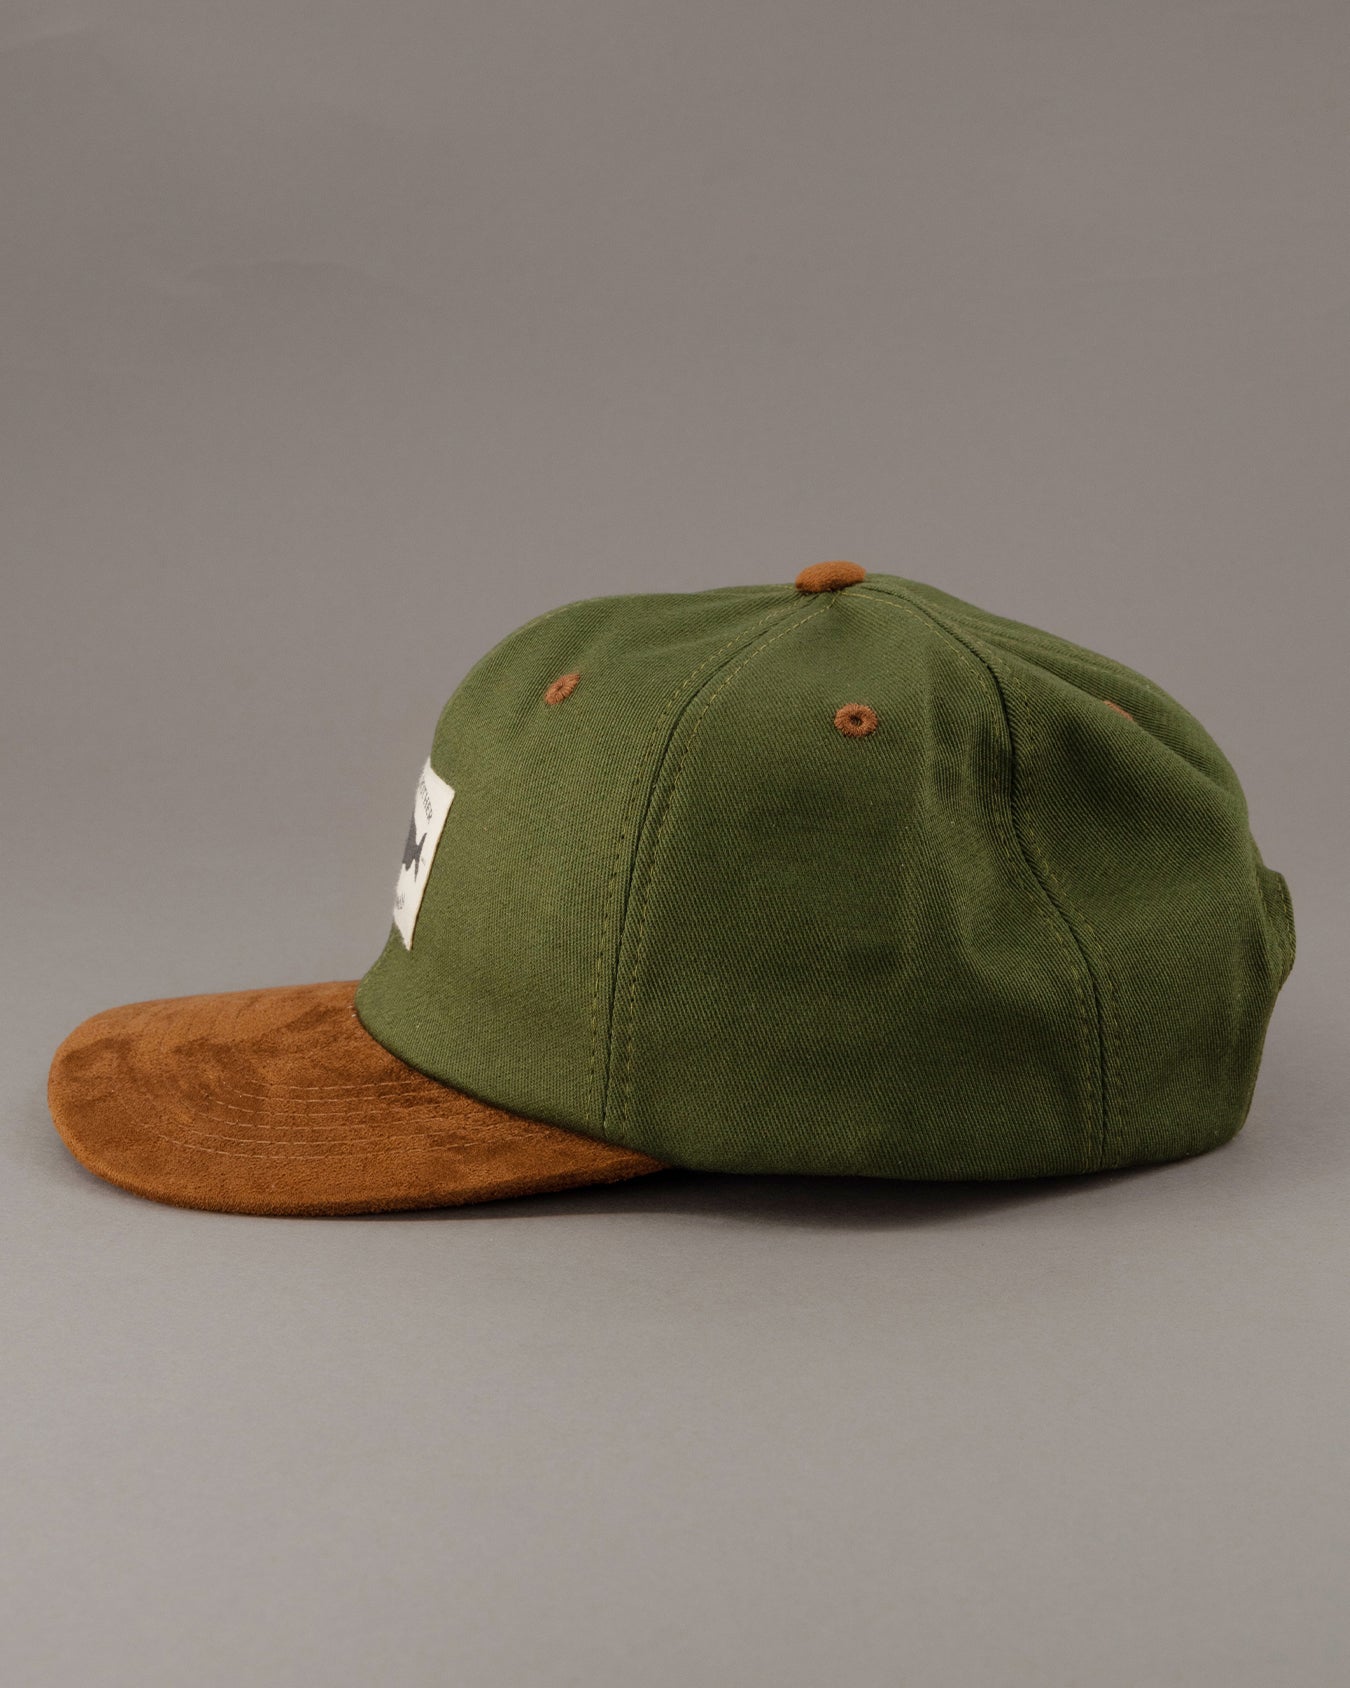 Just Another Fisherman Old Sea Dog Cap - Brown